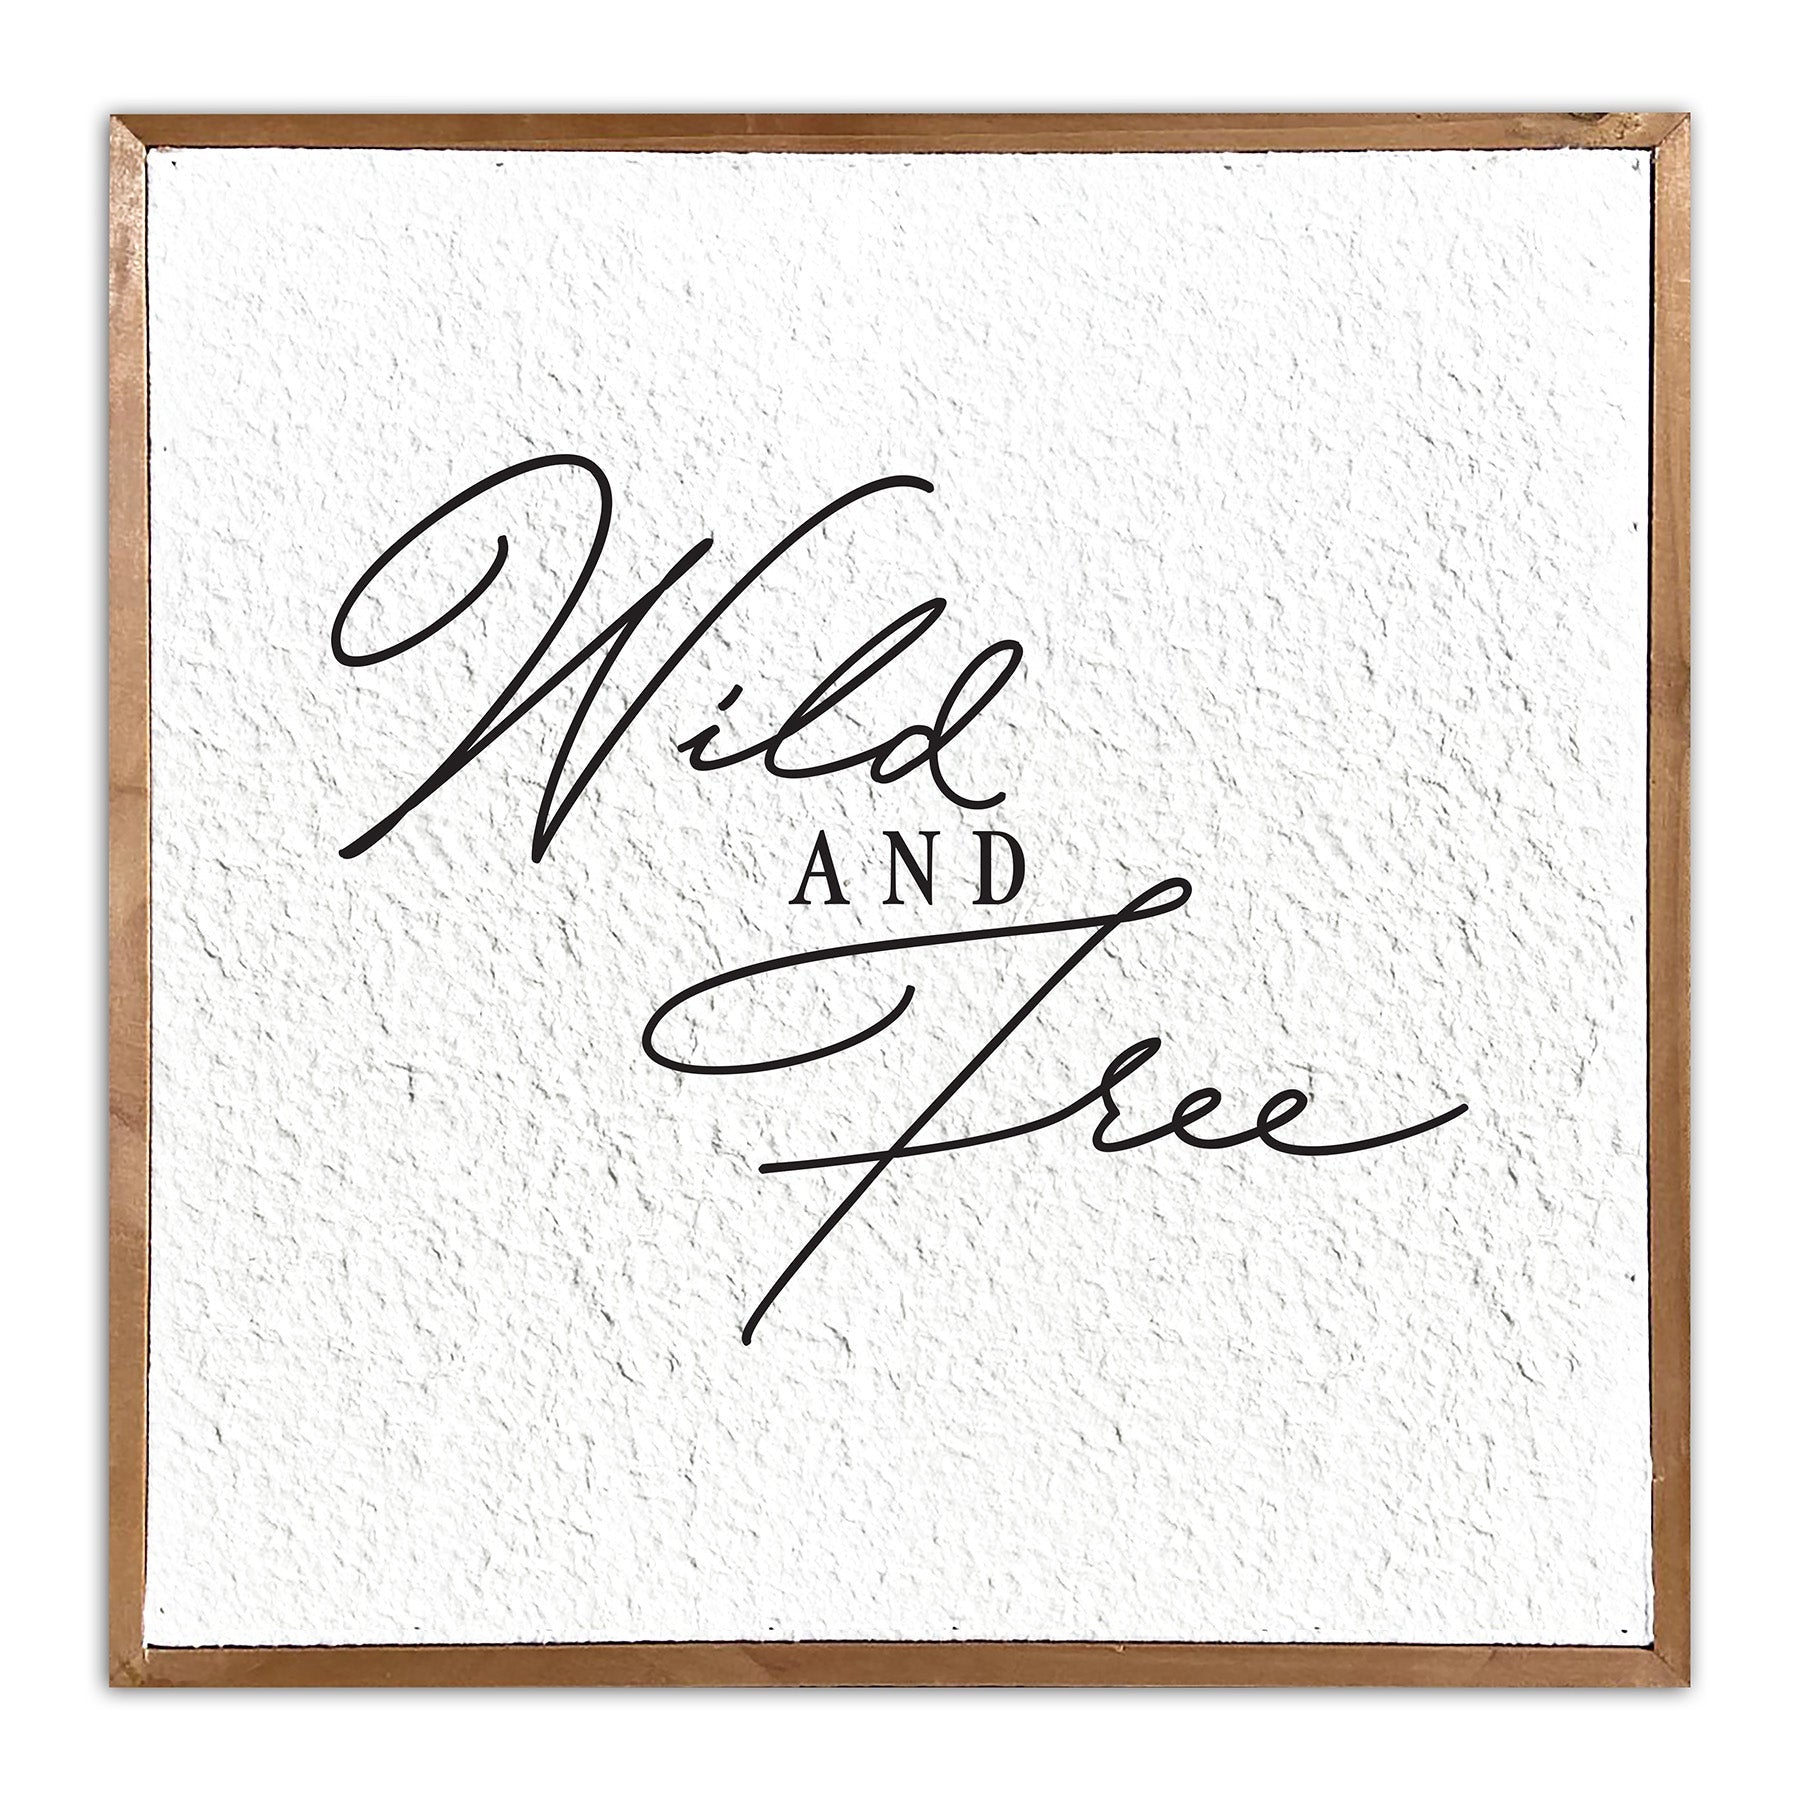 Wild and Free / 14x14 Pulp Paper Wall Decor